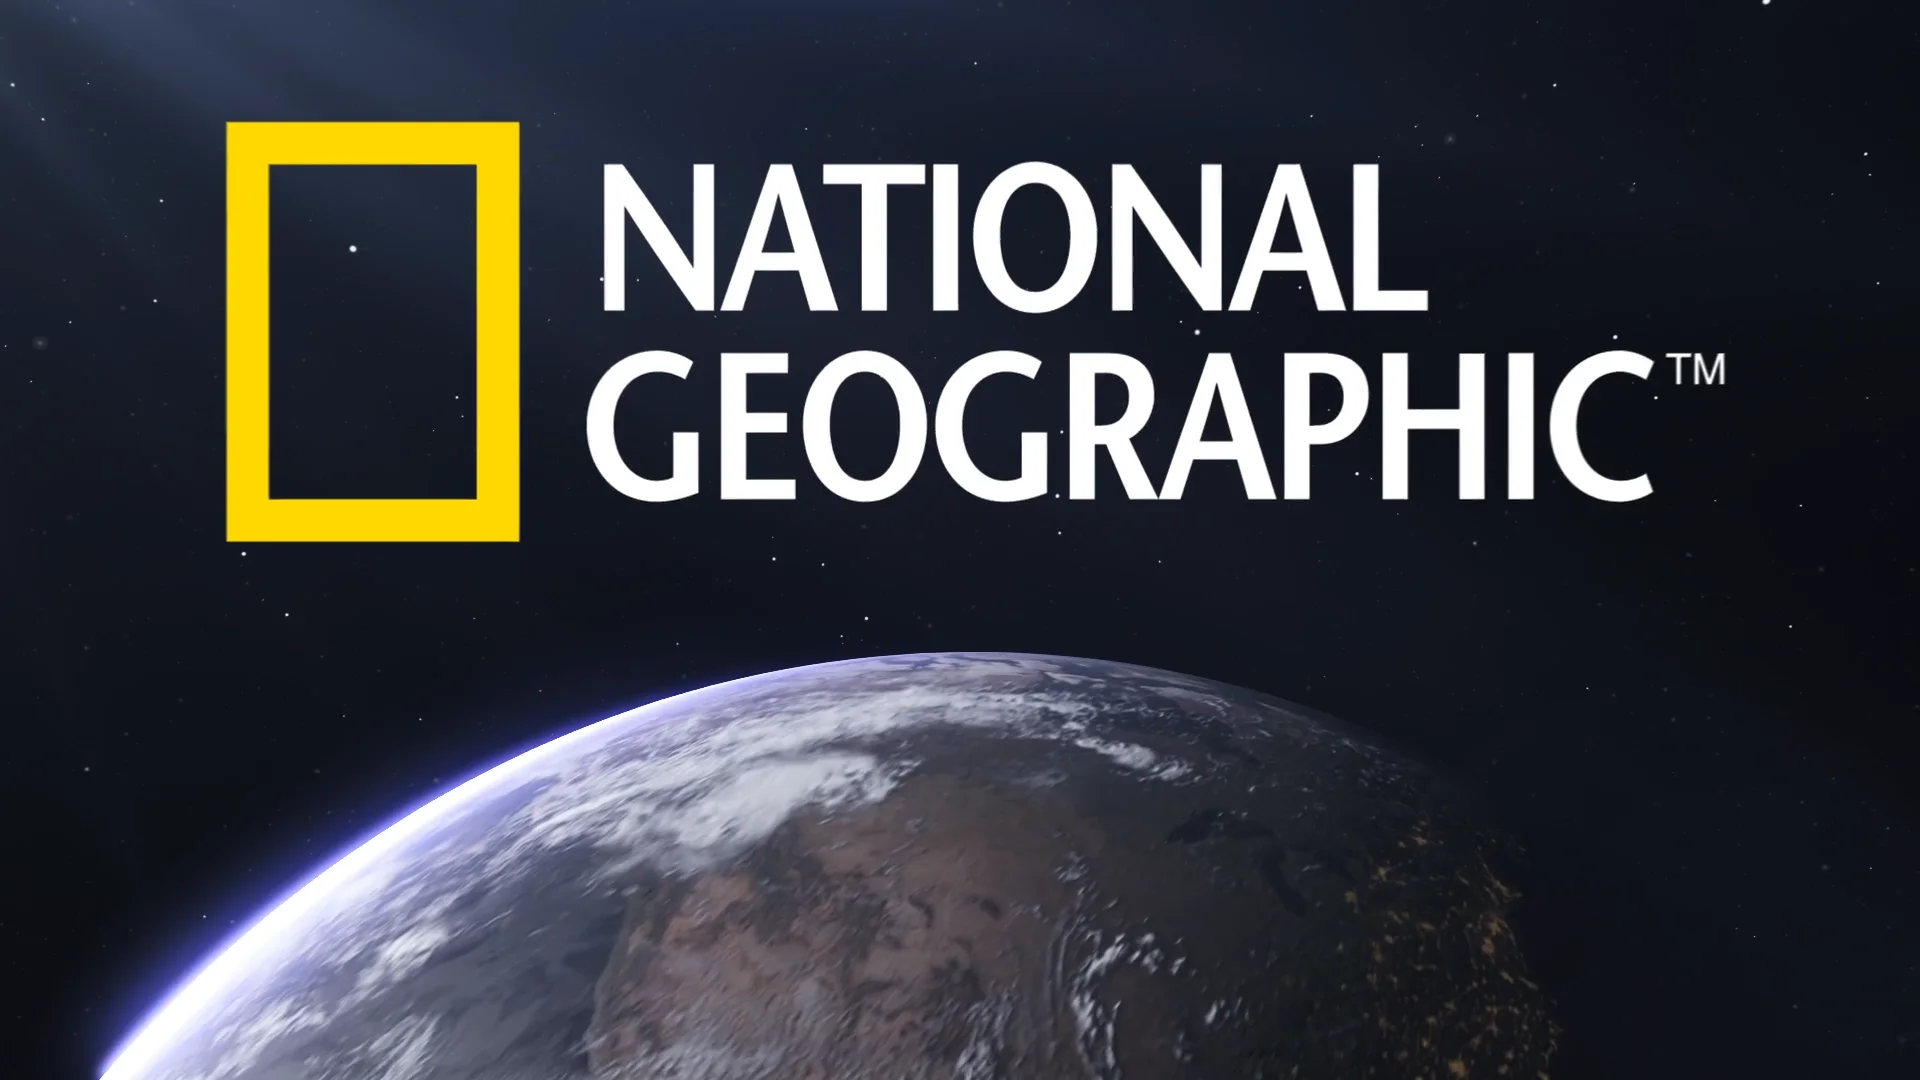 national geographic science wallpaper hd